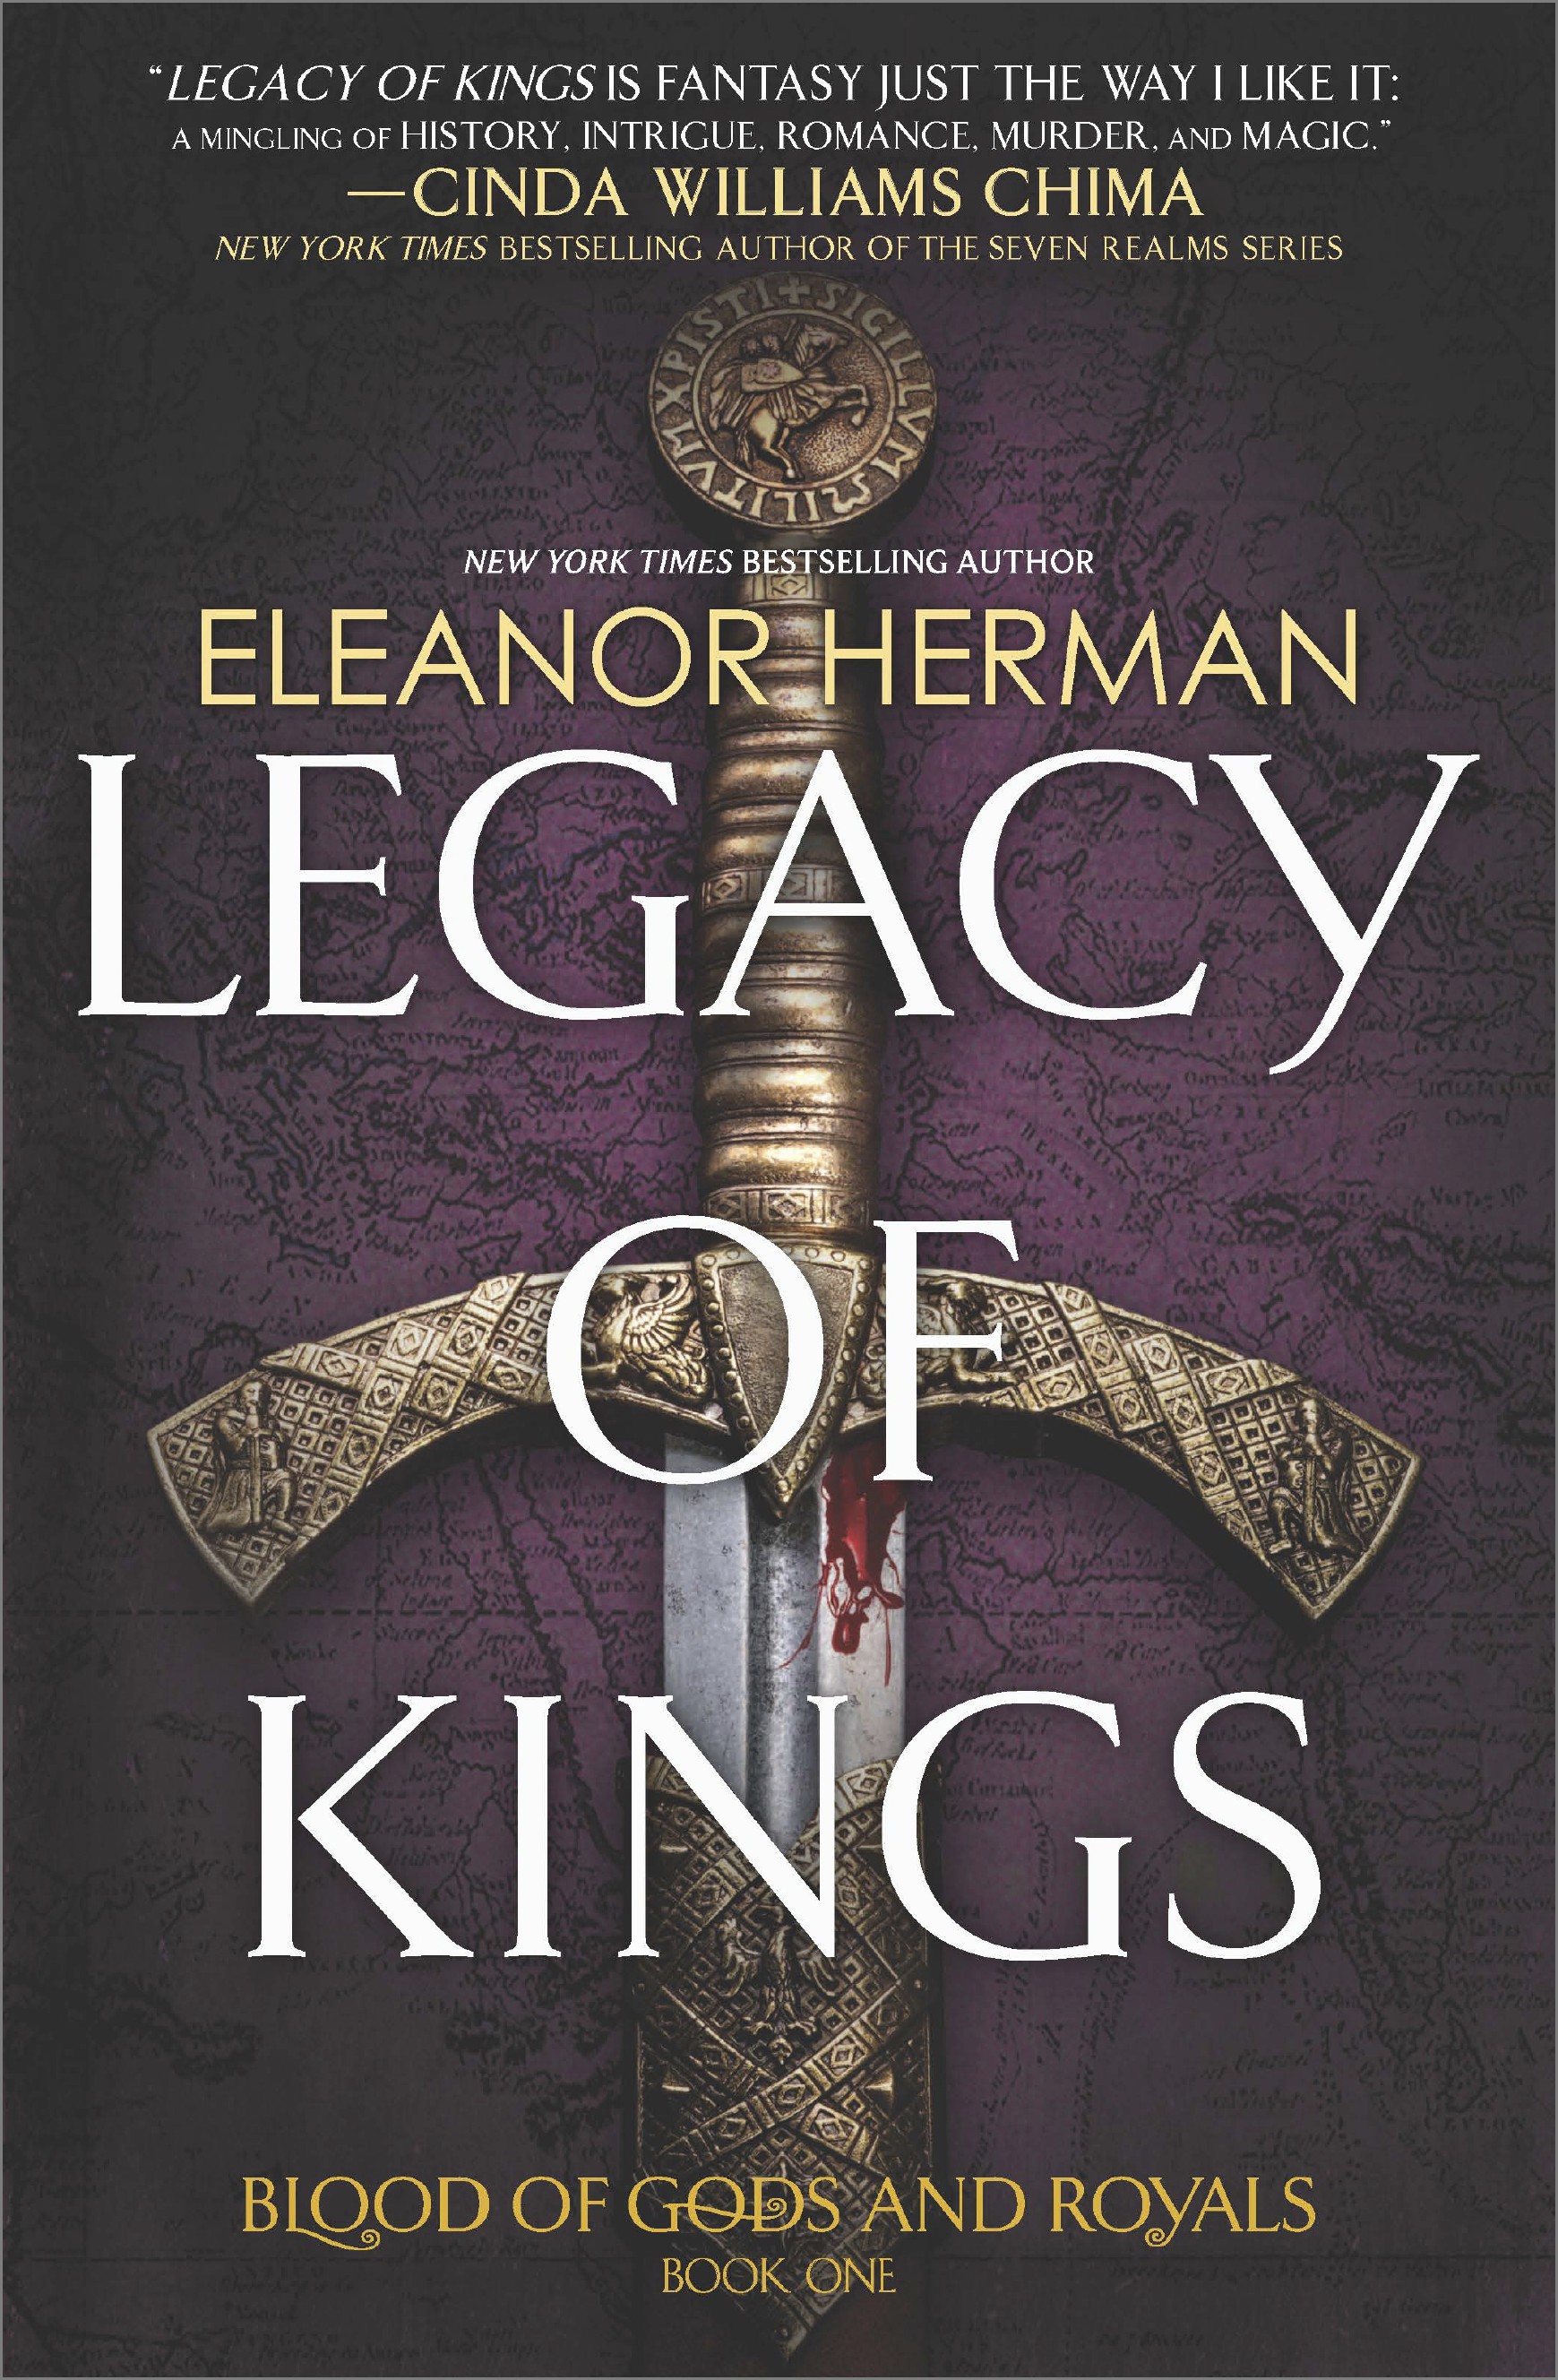 Legacy of kings cover image